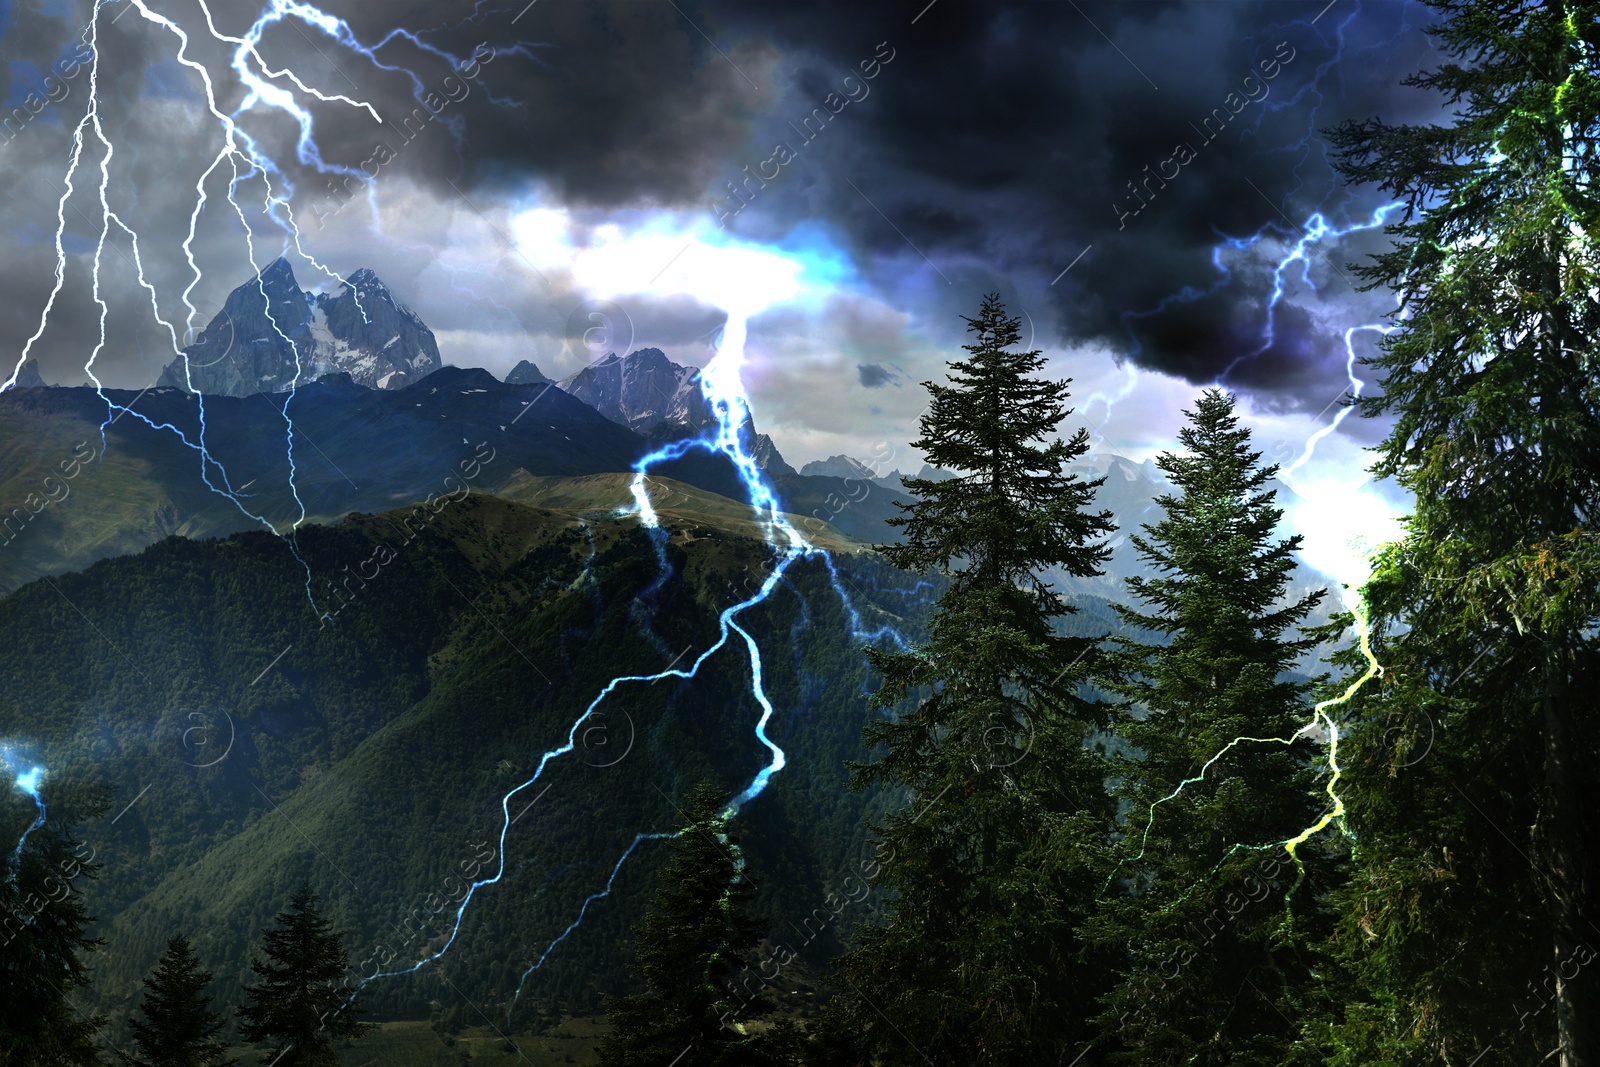 Image of Thunder cloud with lightnings over mountains. Severe weather